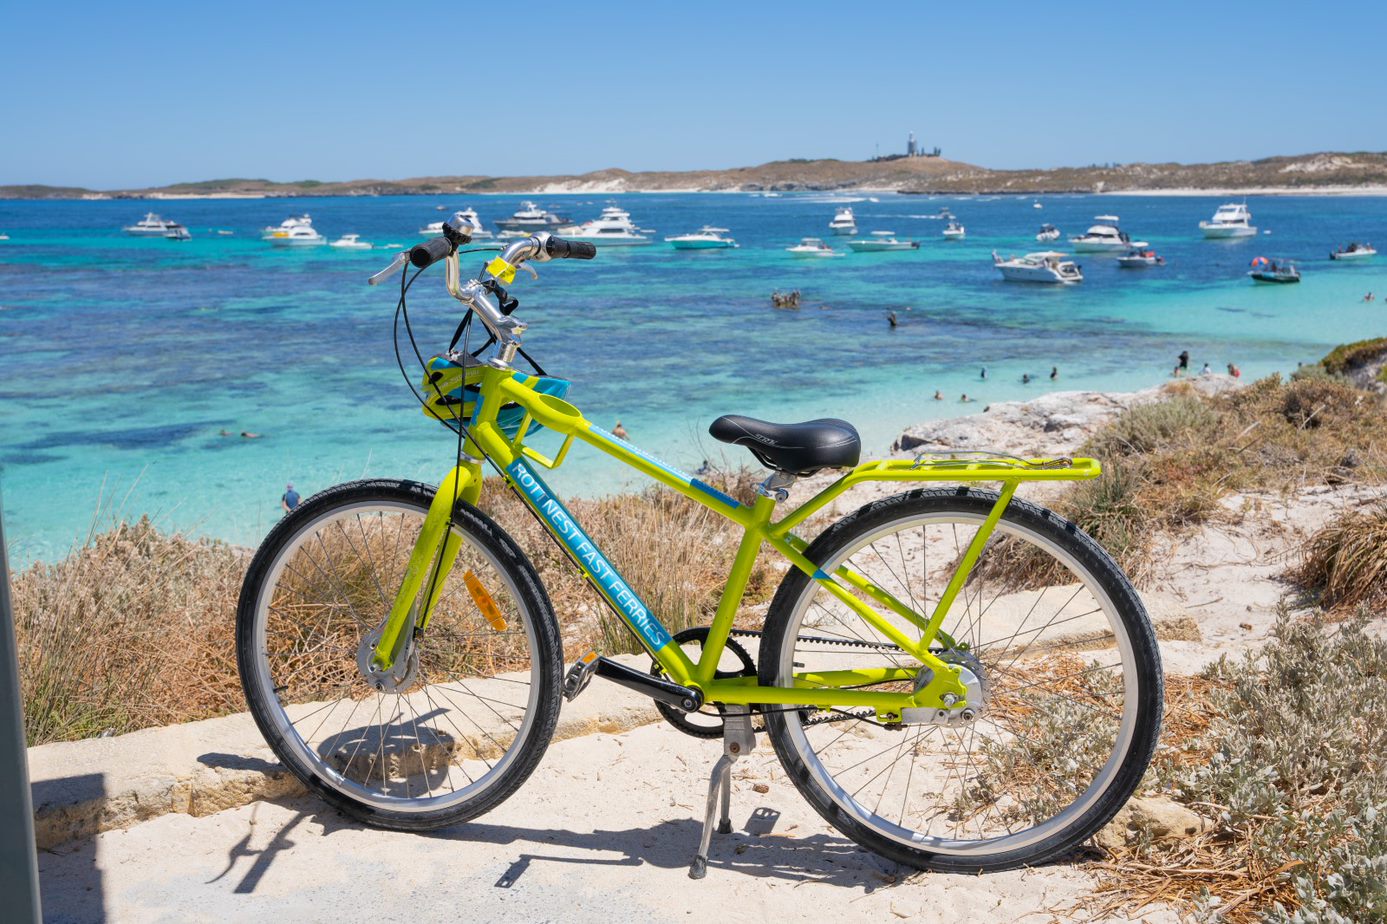  The Best of Rottnest Package